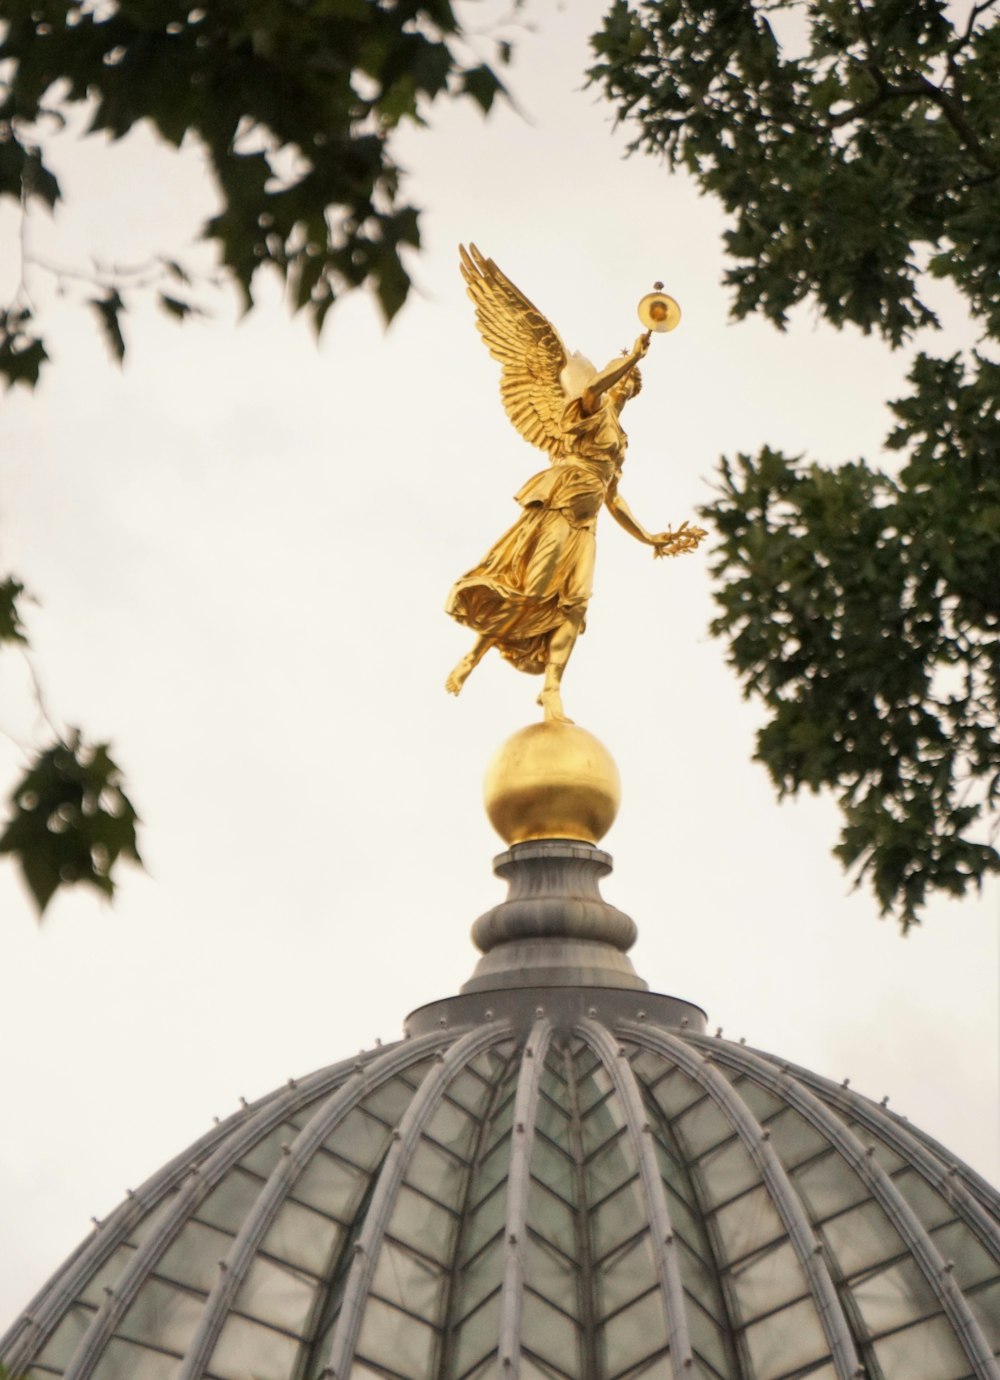 a golden statue on top of a domed building